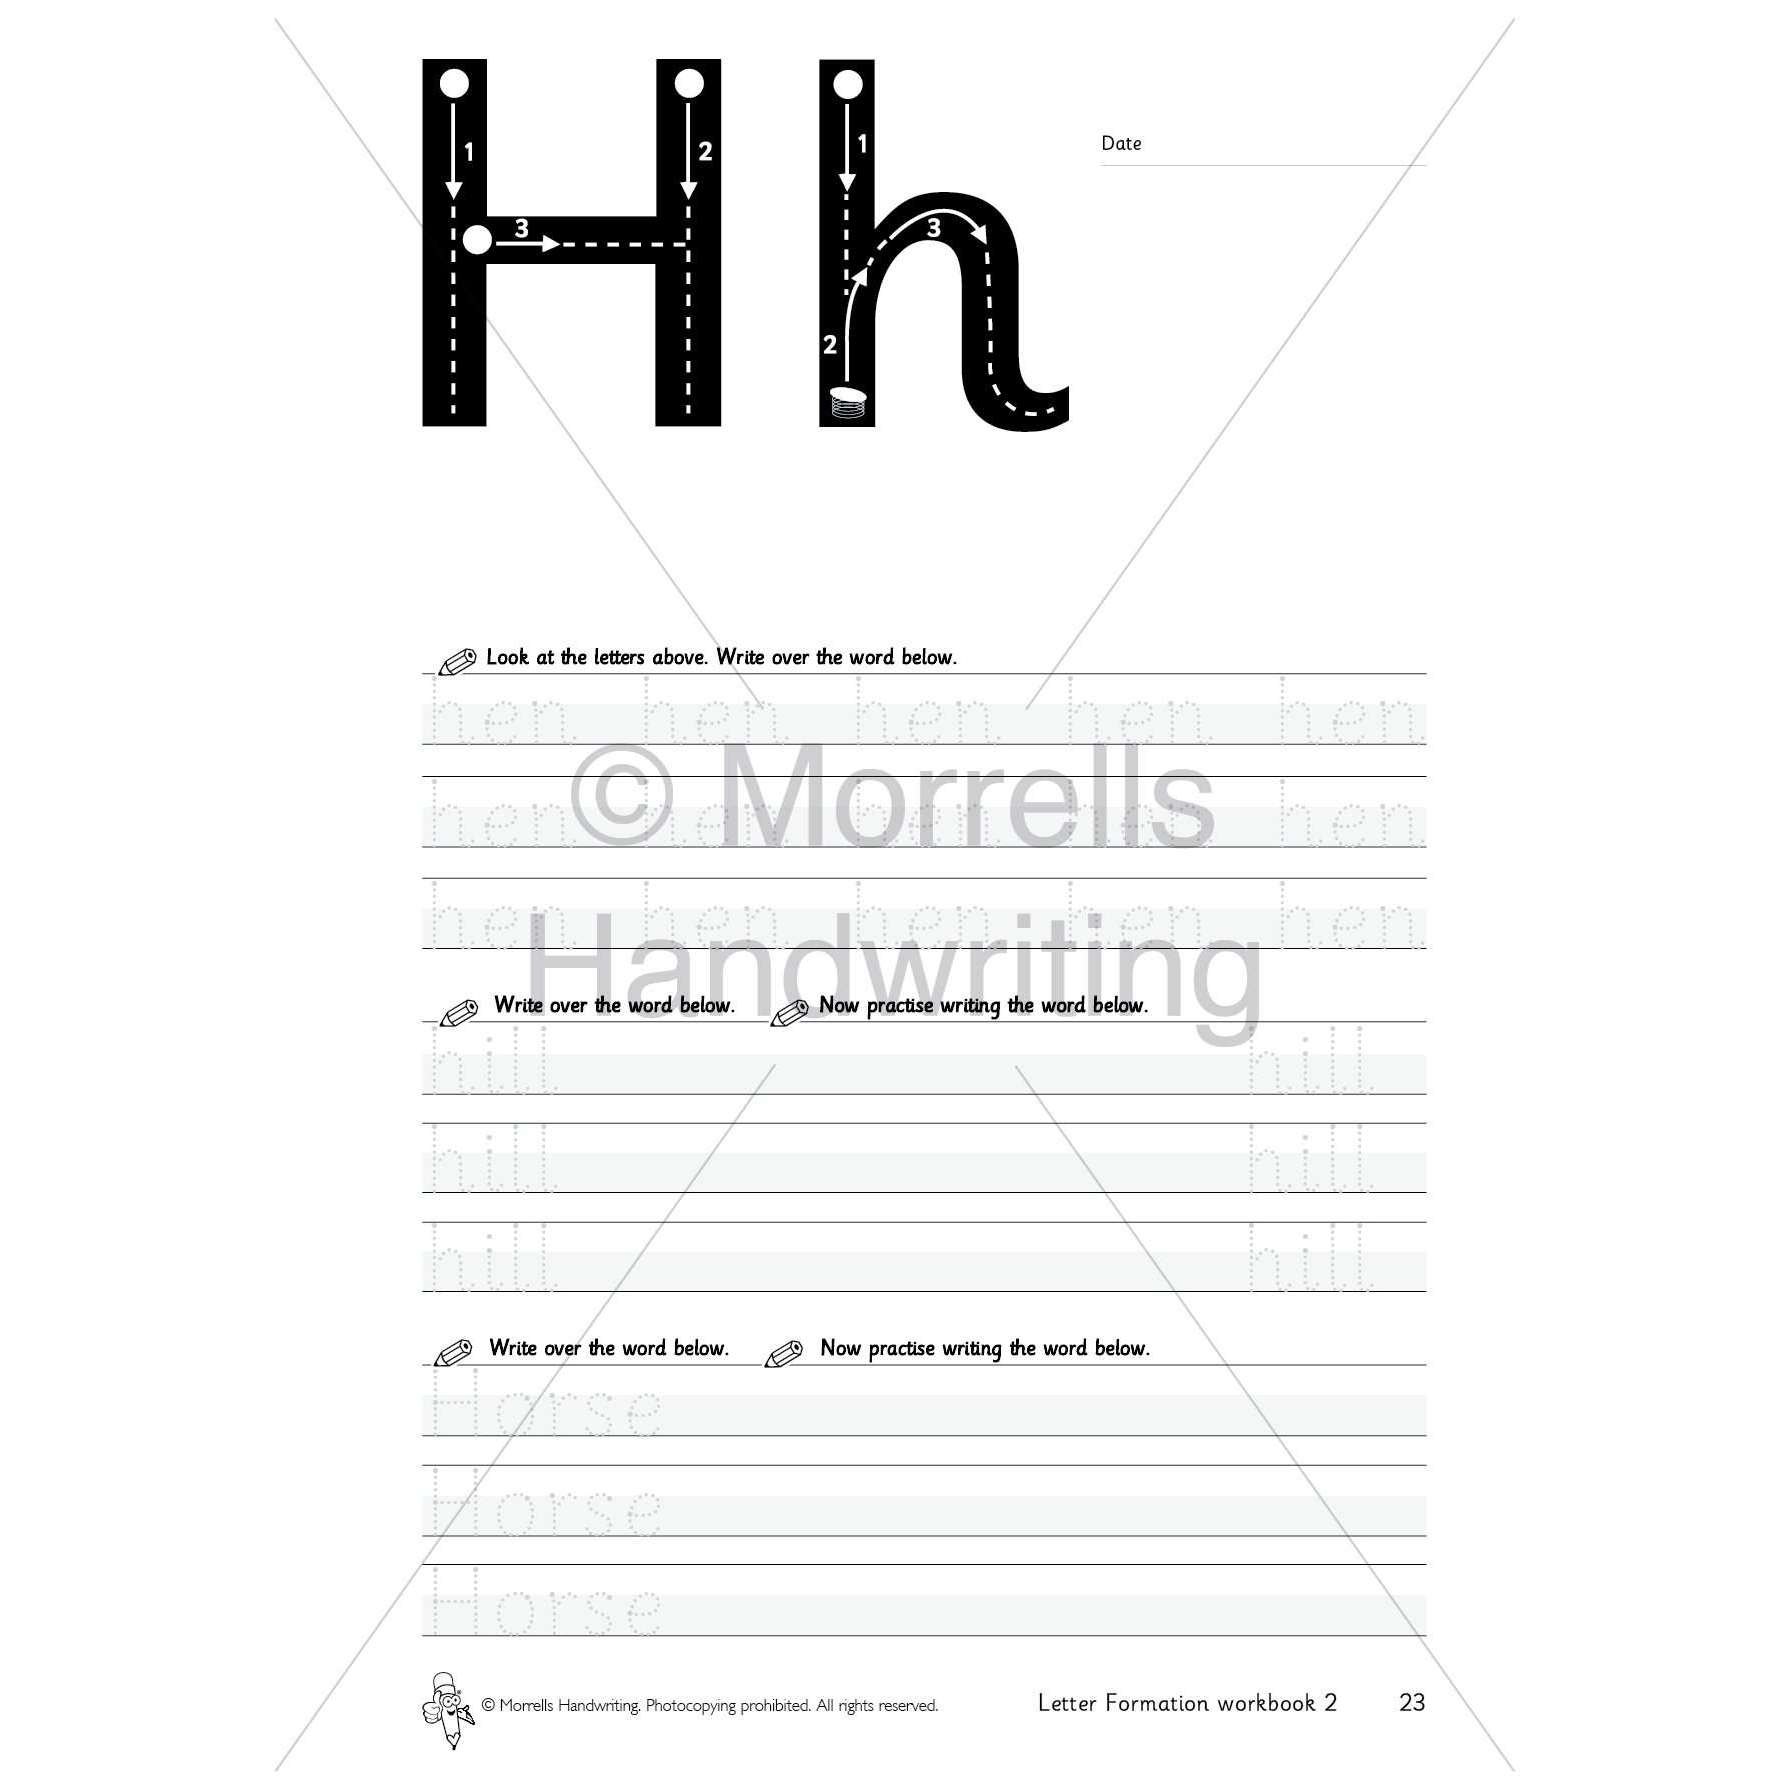 Morrells Handwriting - Letter Formation - Workbook 2:Primary Classroom Resources